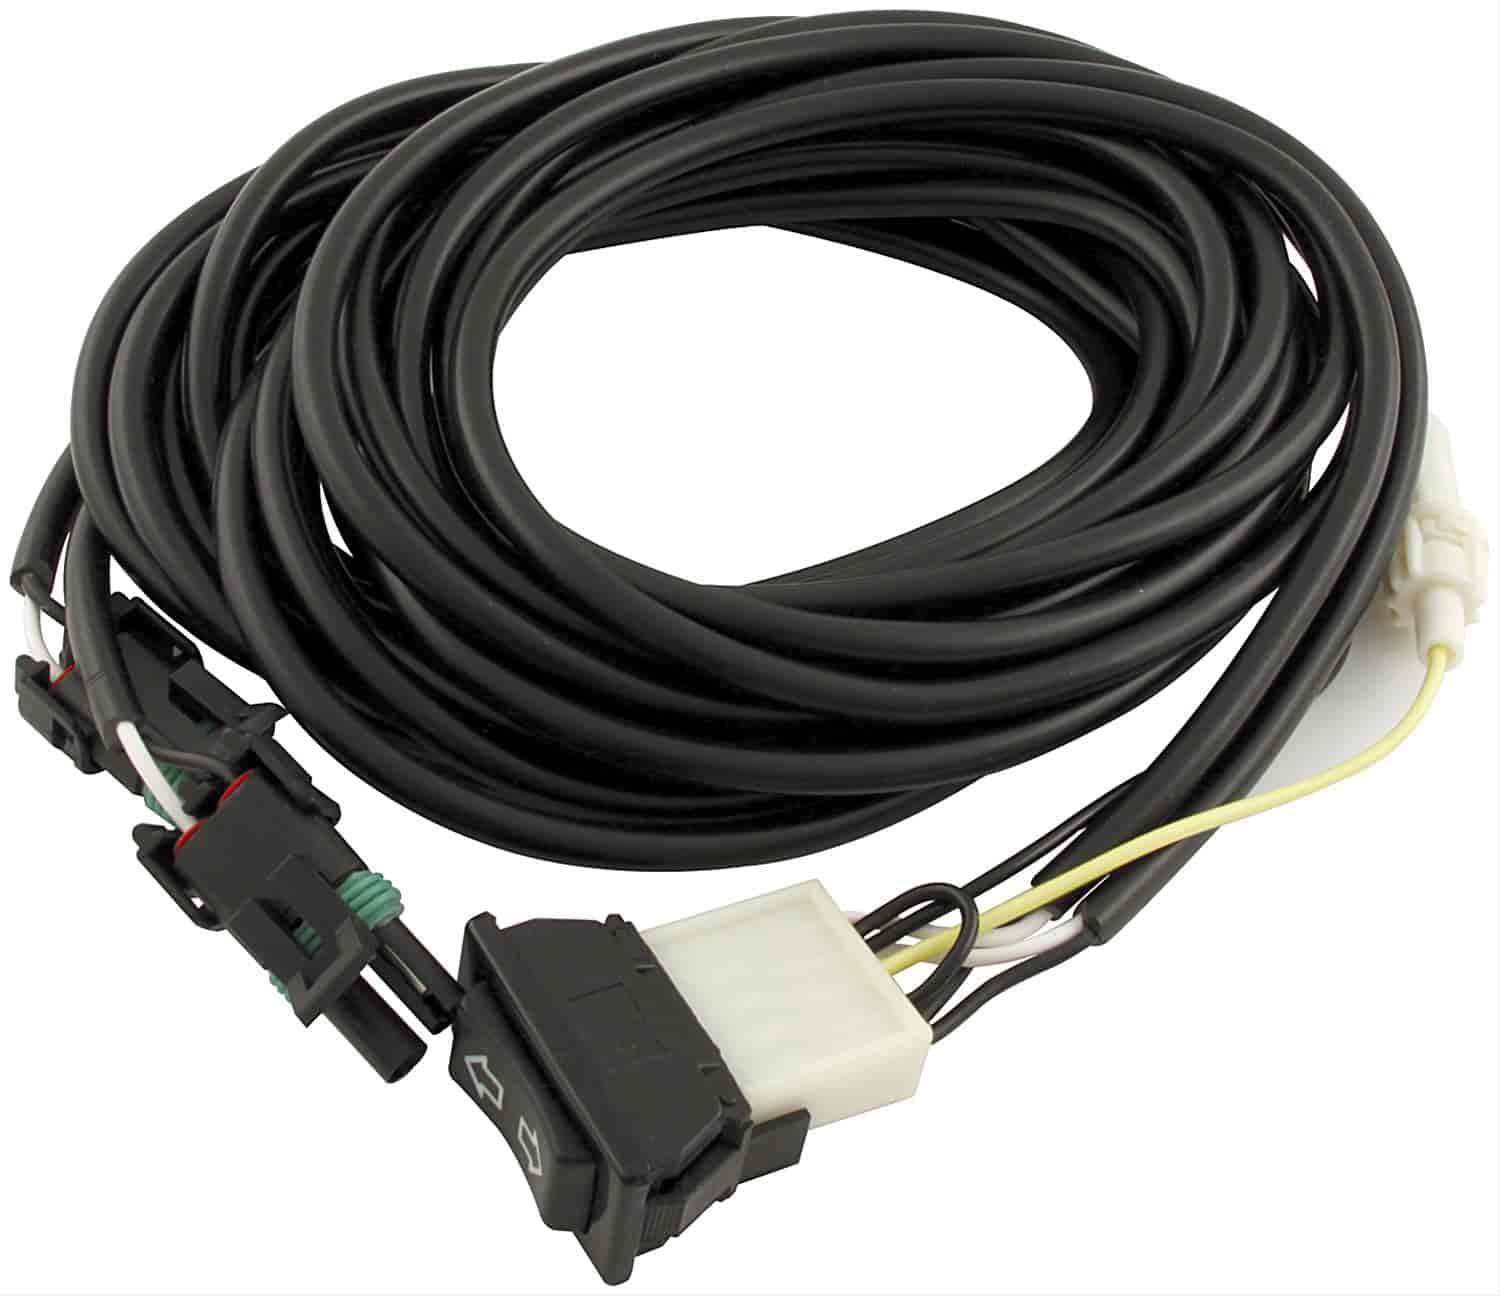 Wiring Harness For Dual Exhaust Cut Out Systems